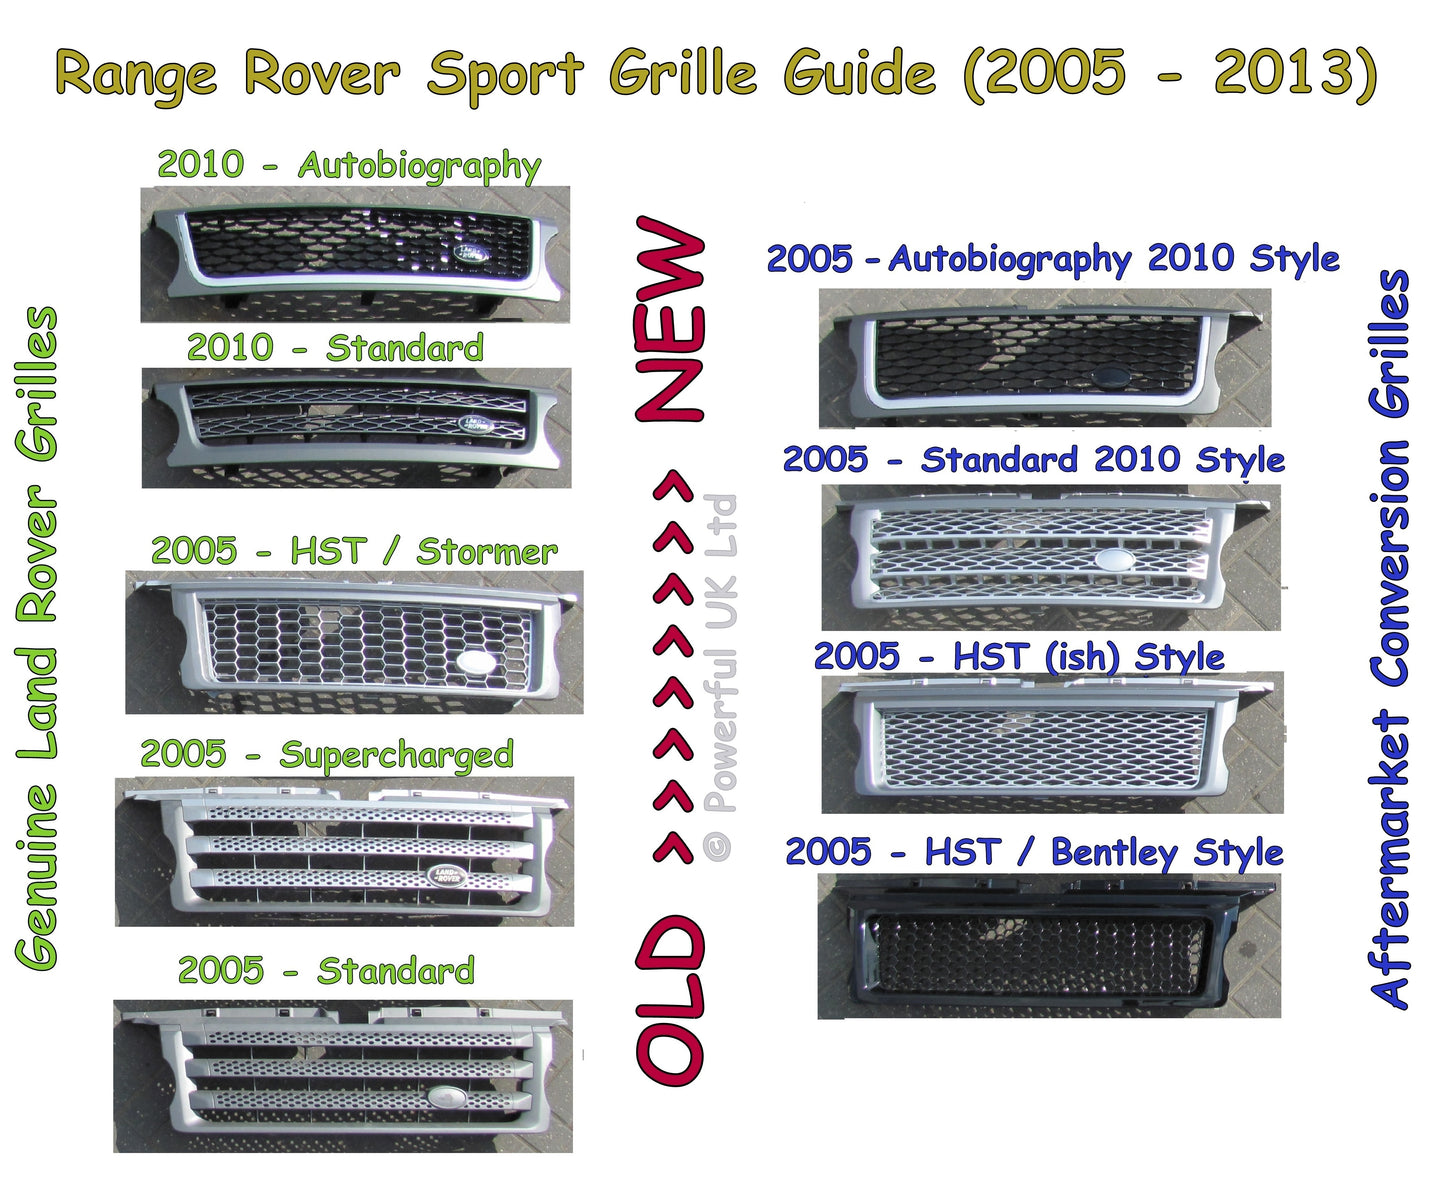 Front Grille - All Chrome for Range Rover Sport 05-09